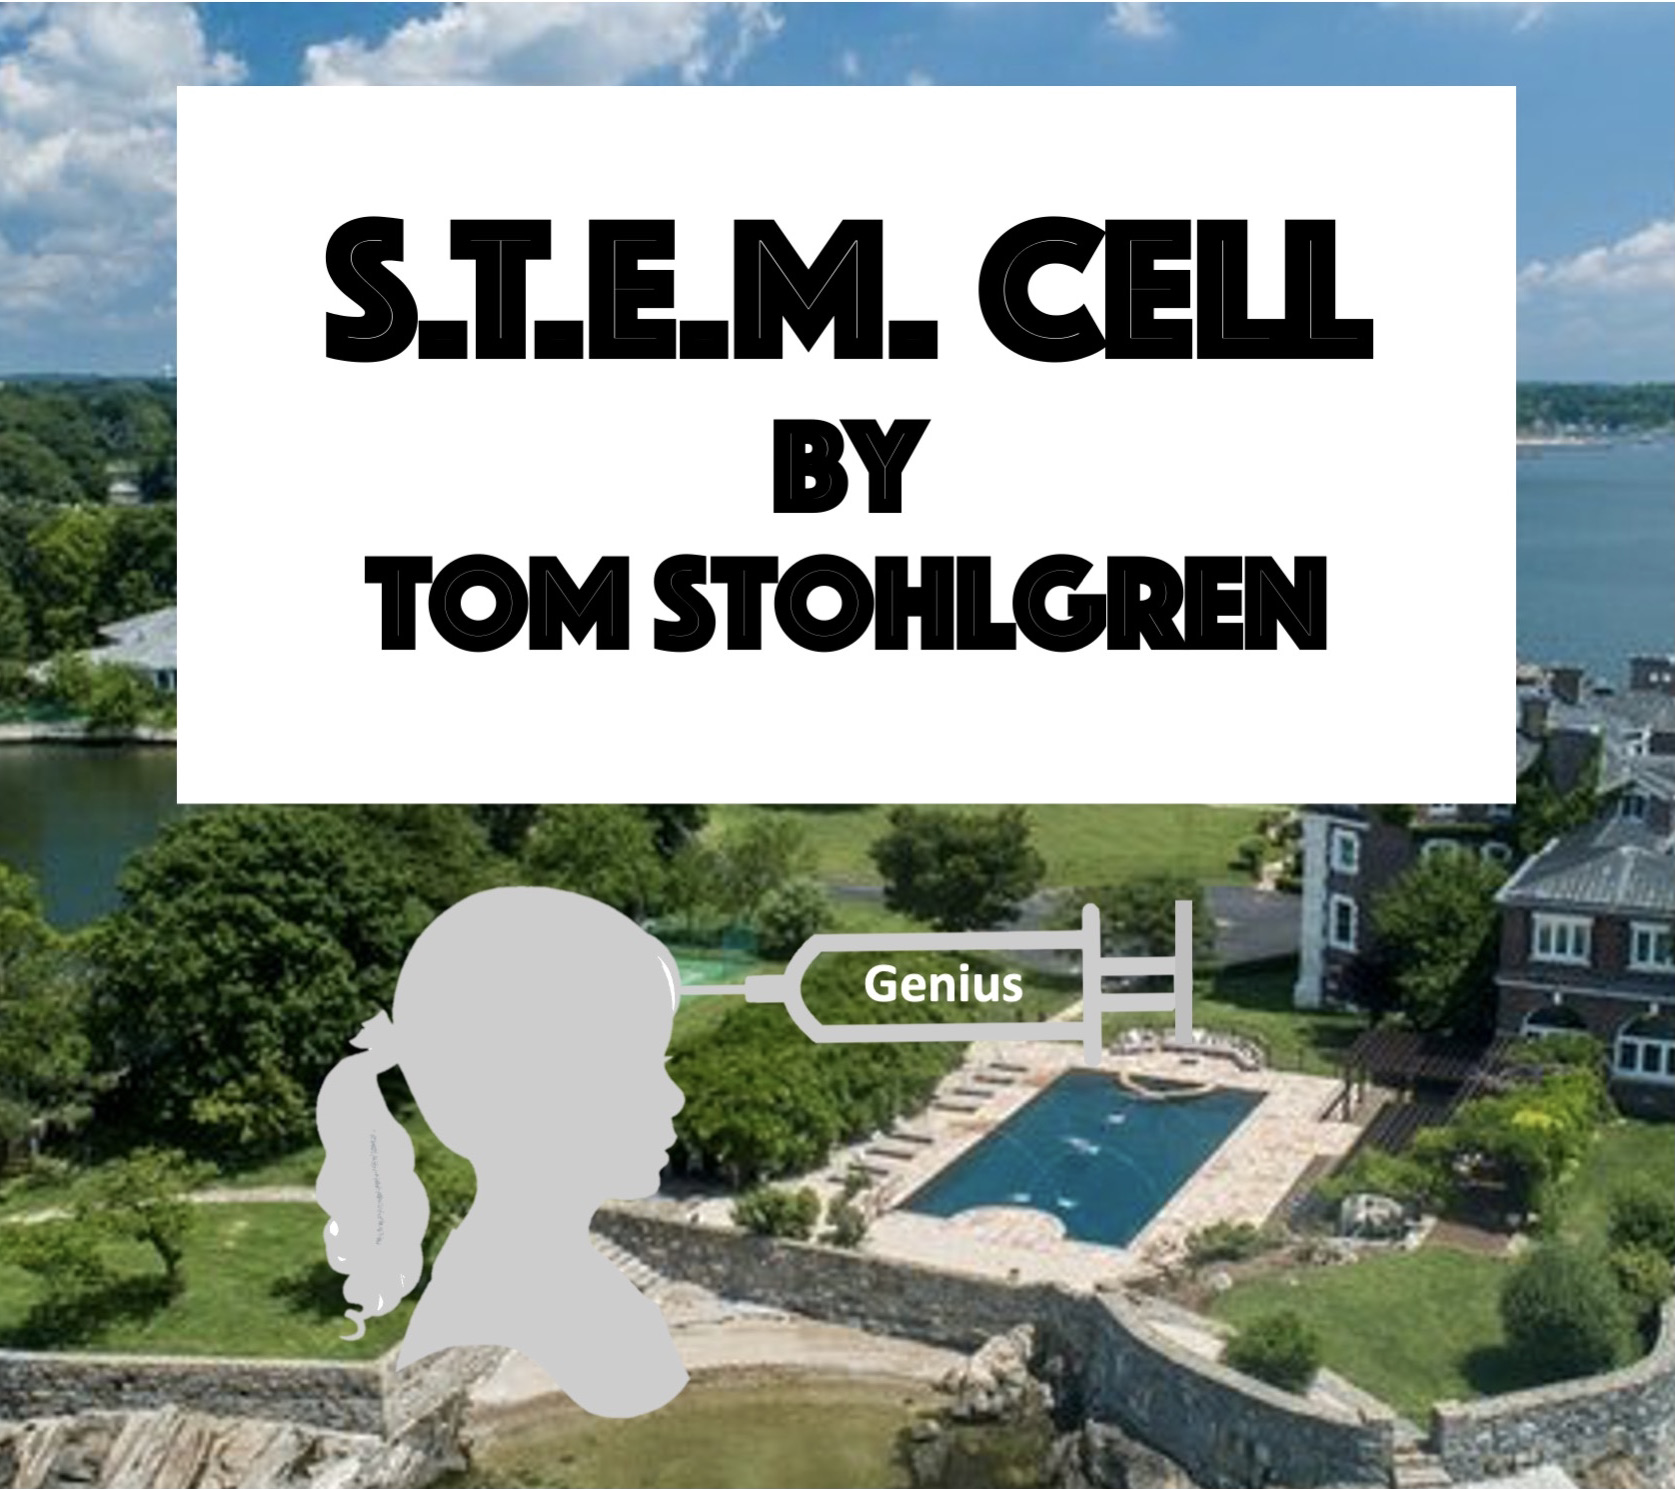 S.T.E.M. CELL